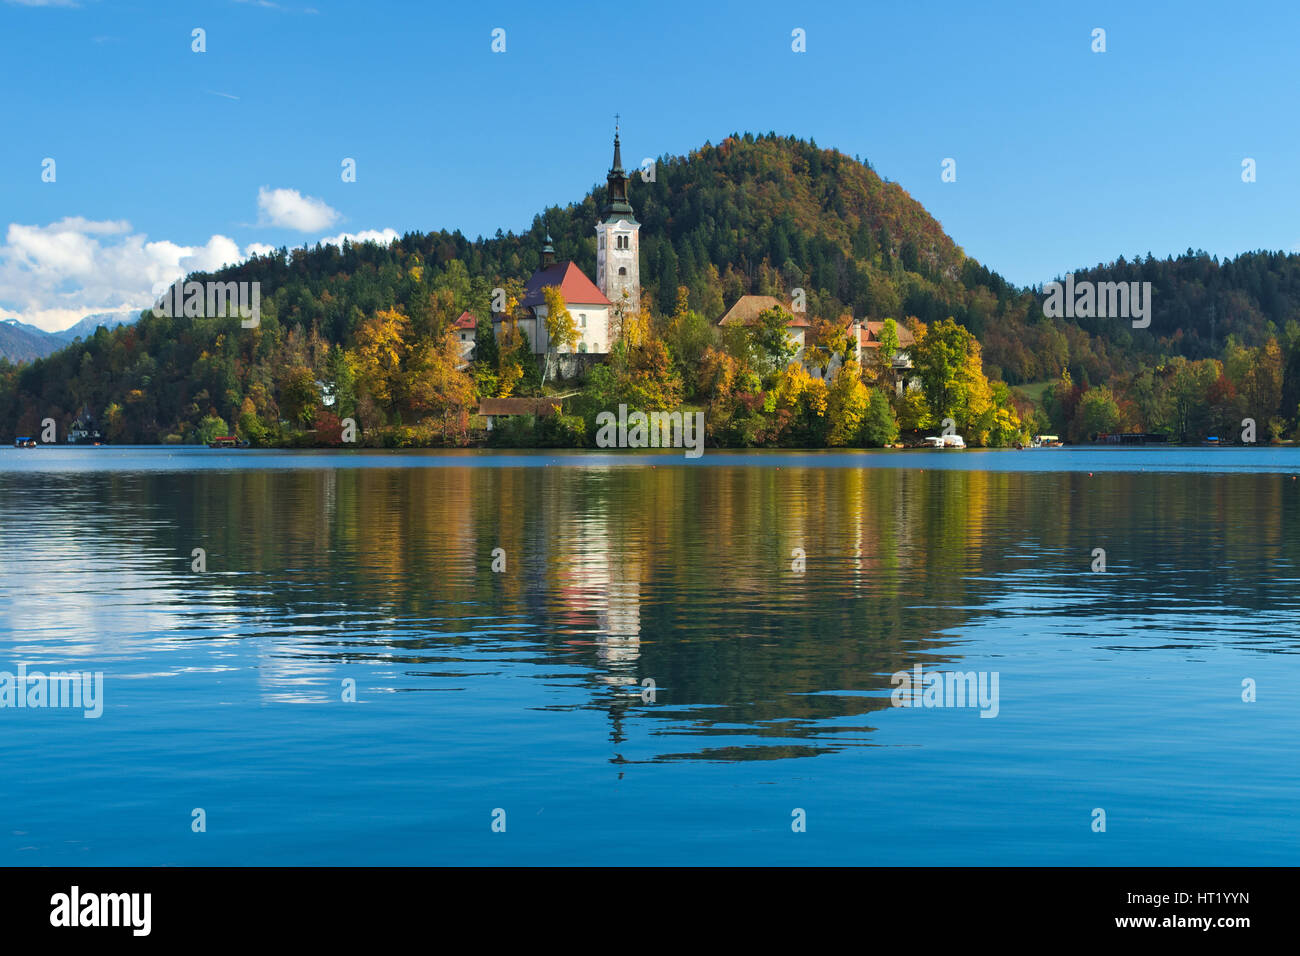 View of the castle and of the Church of the Assumption in the island of the Lake of Bled (Blejsko jezero), Slovenia Stock Photo